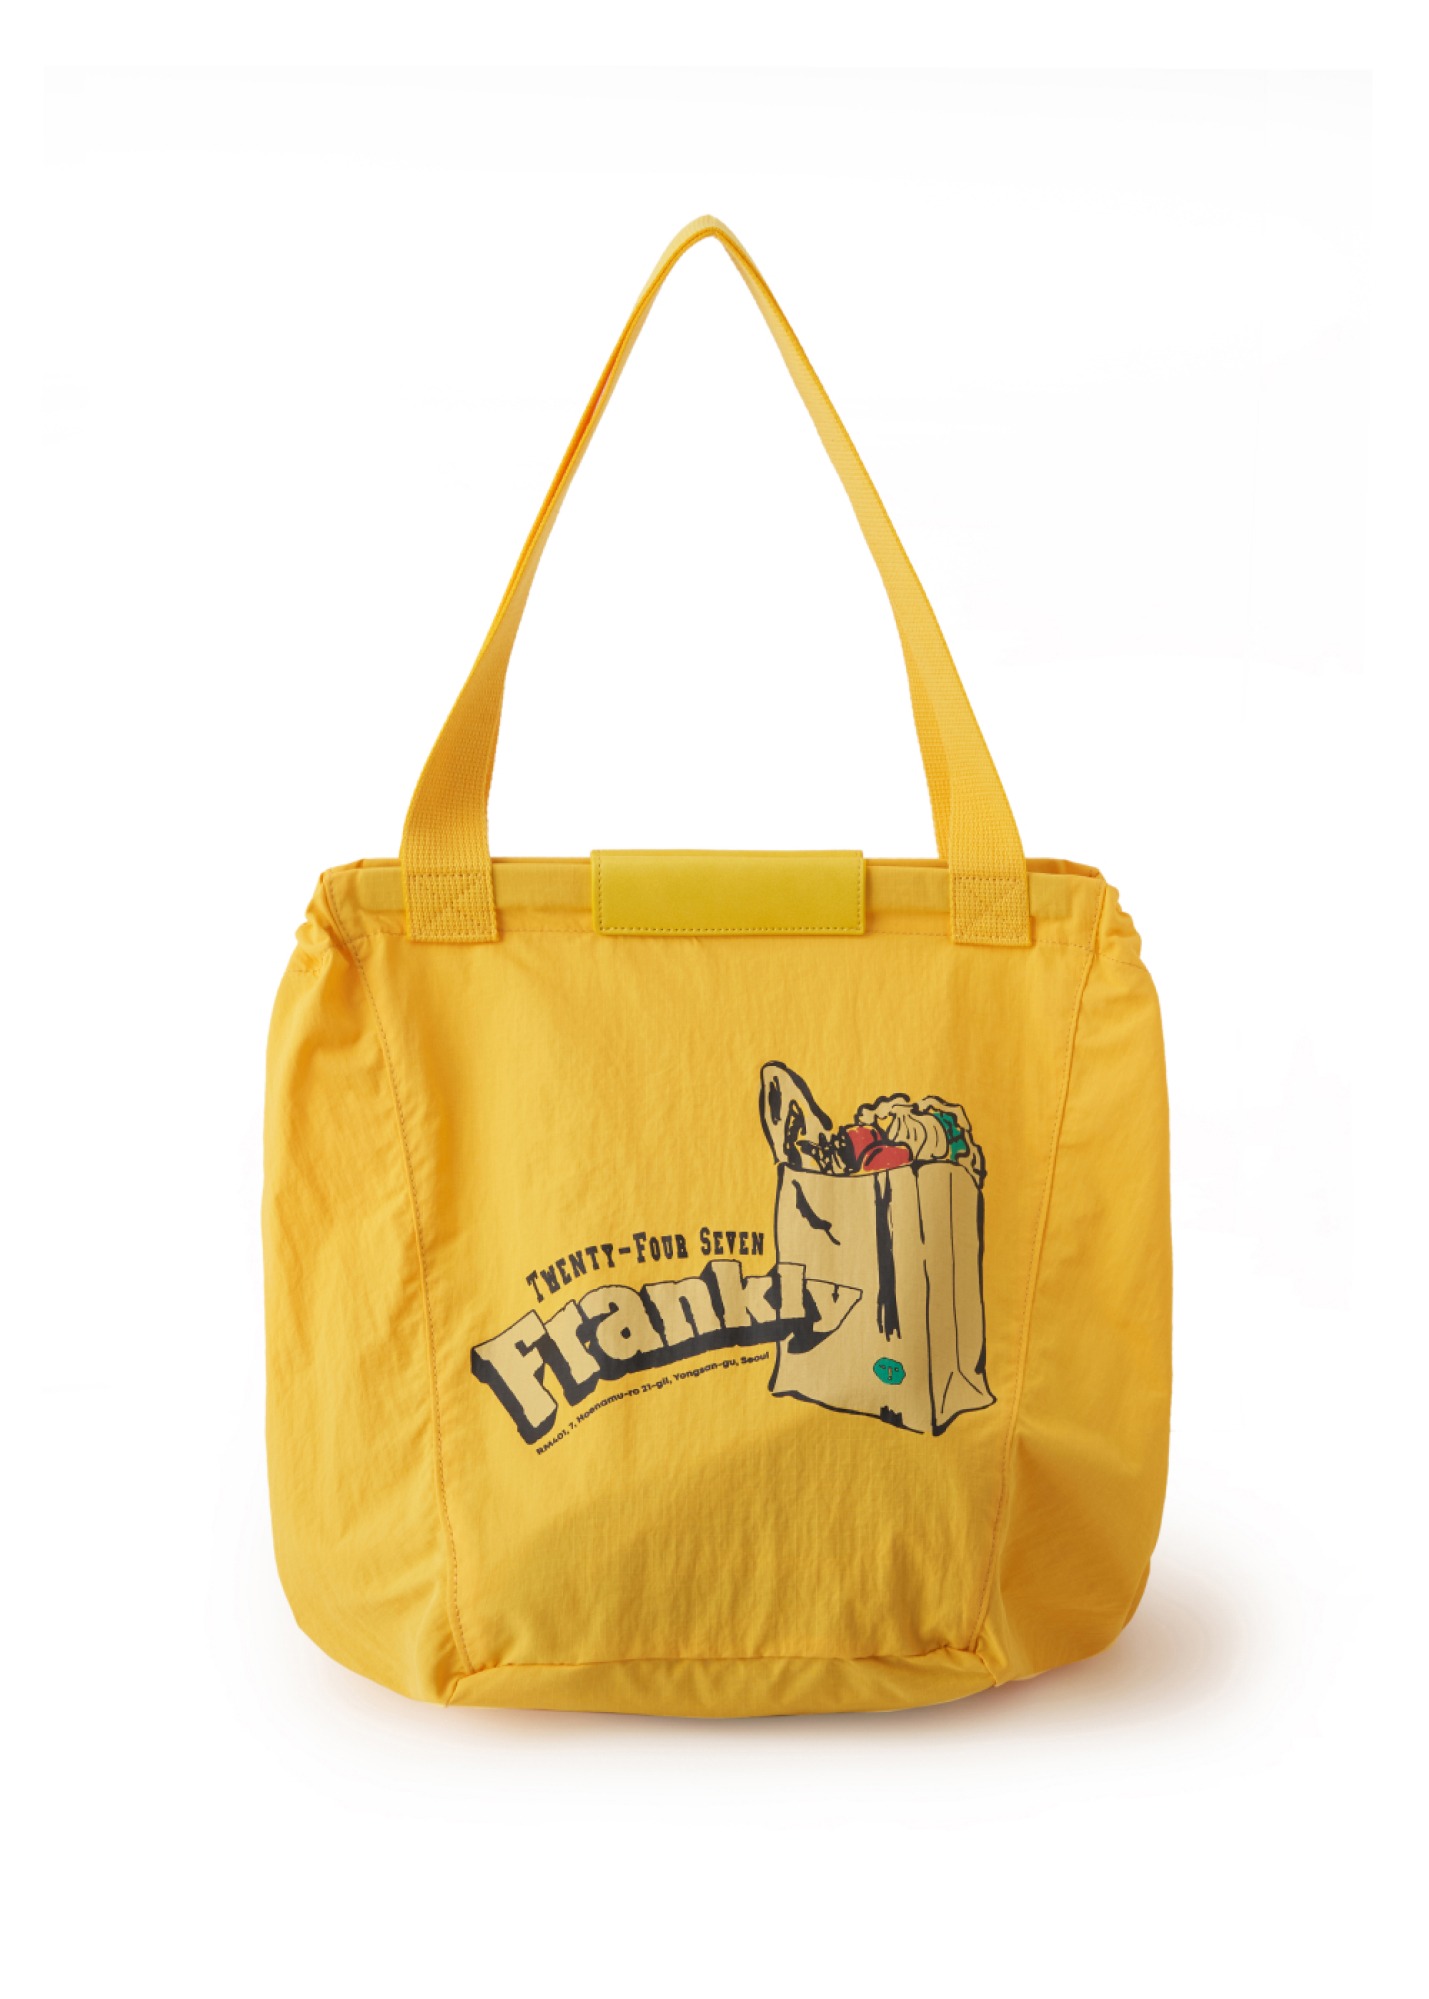 FRANKLY Grocery Tote Bag, Yellow,FRANKLY